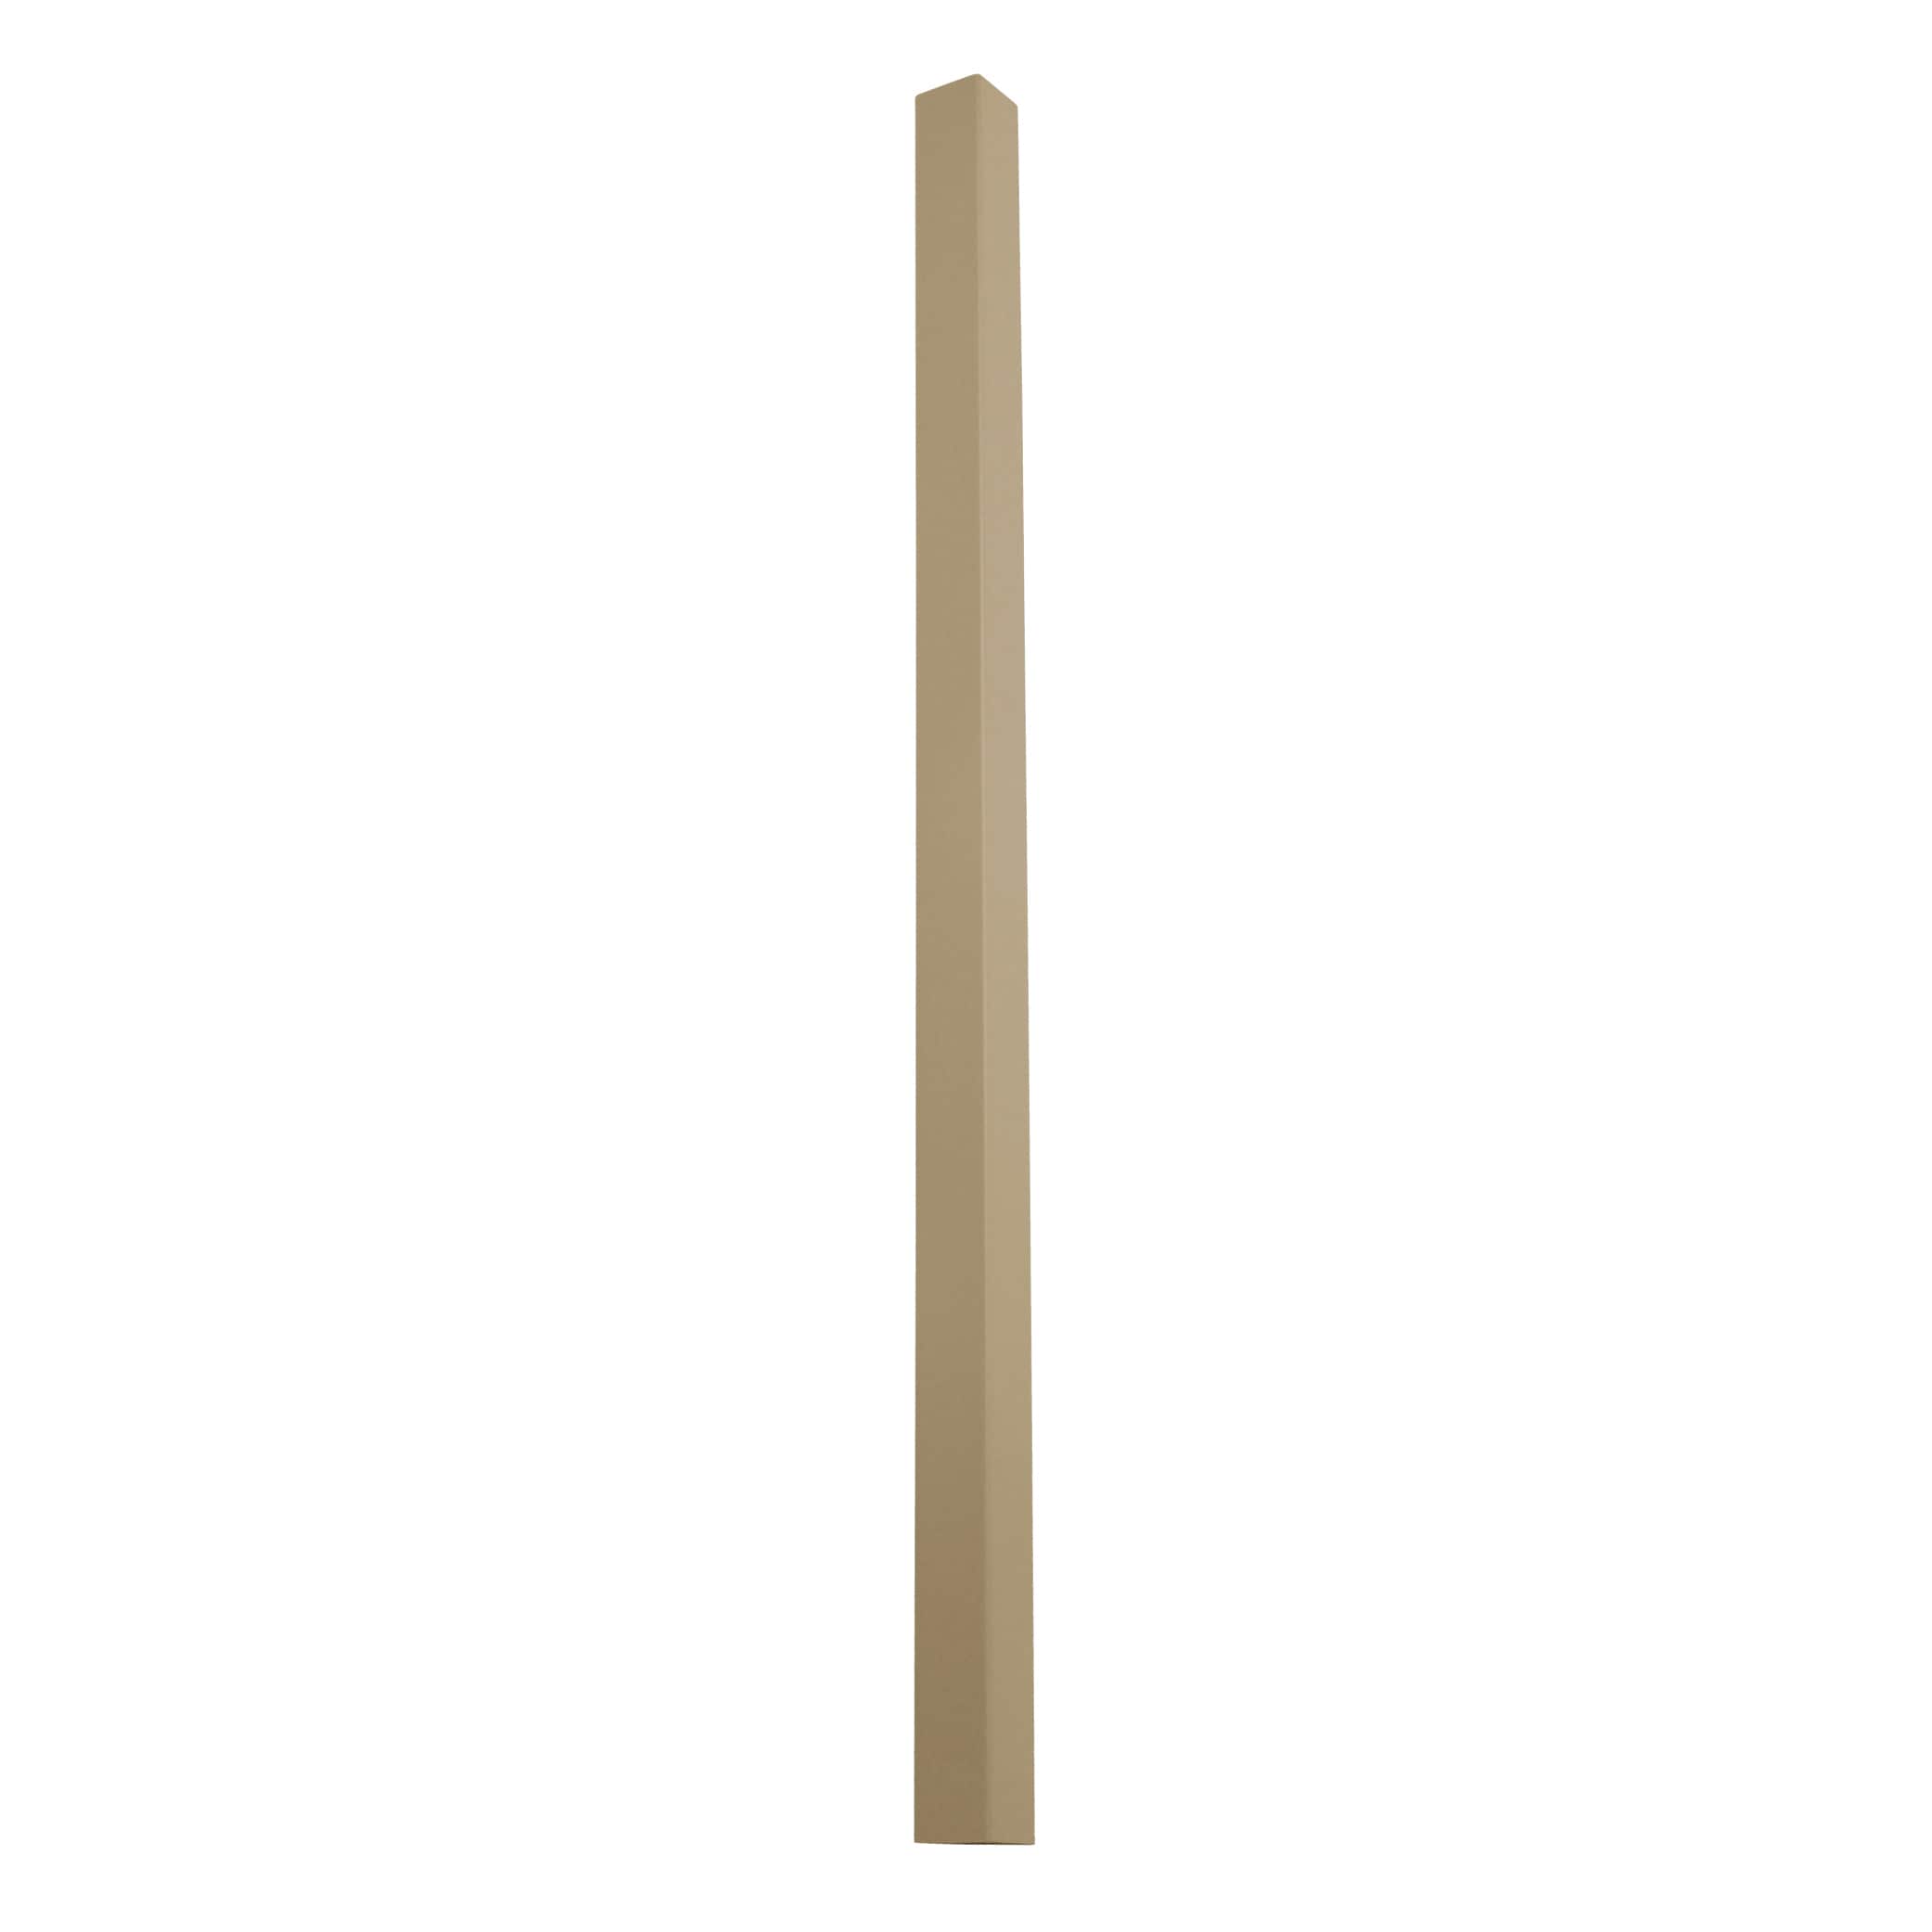 2-in x 30-in Deck Balusters at Lowes.com